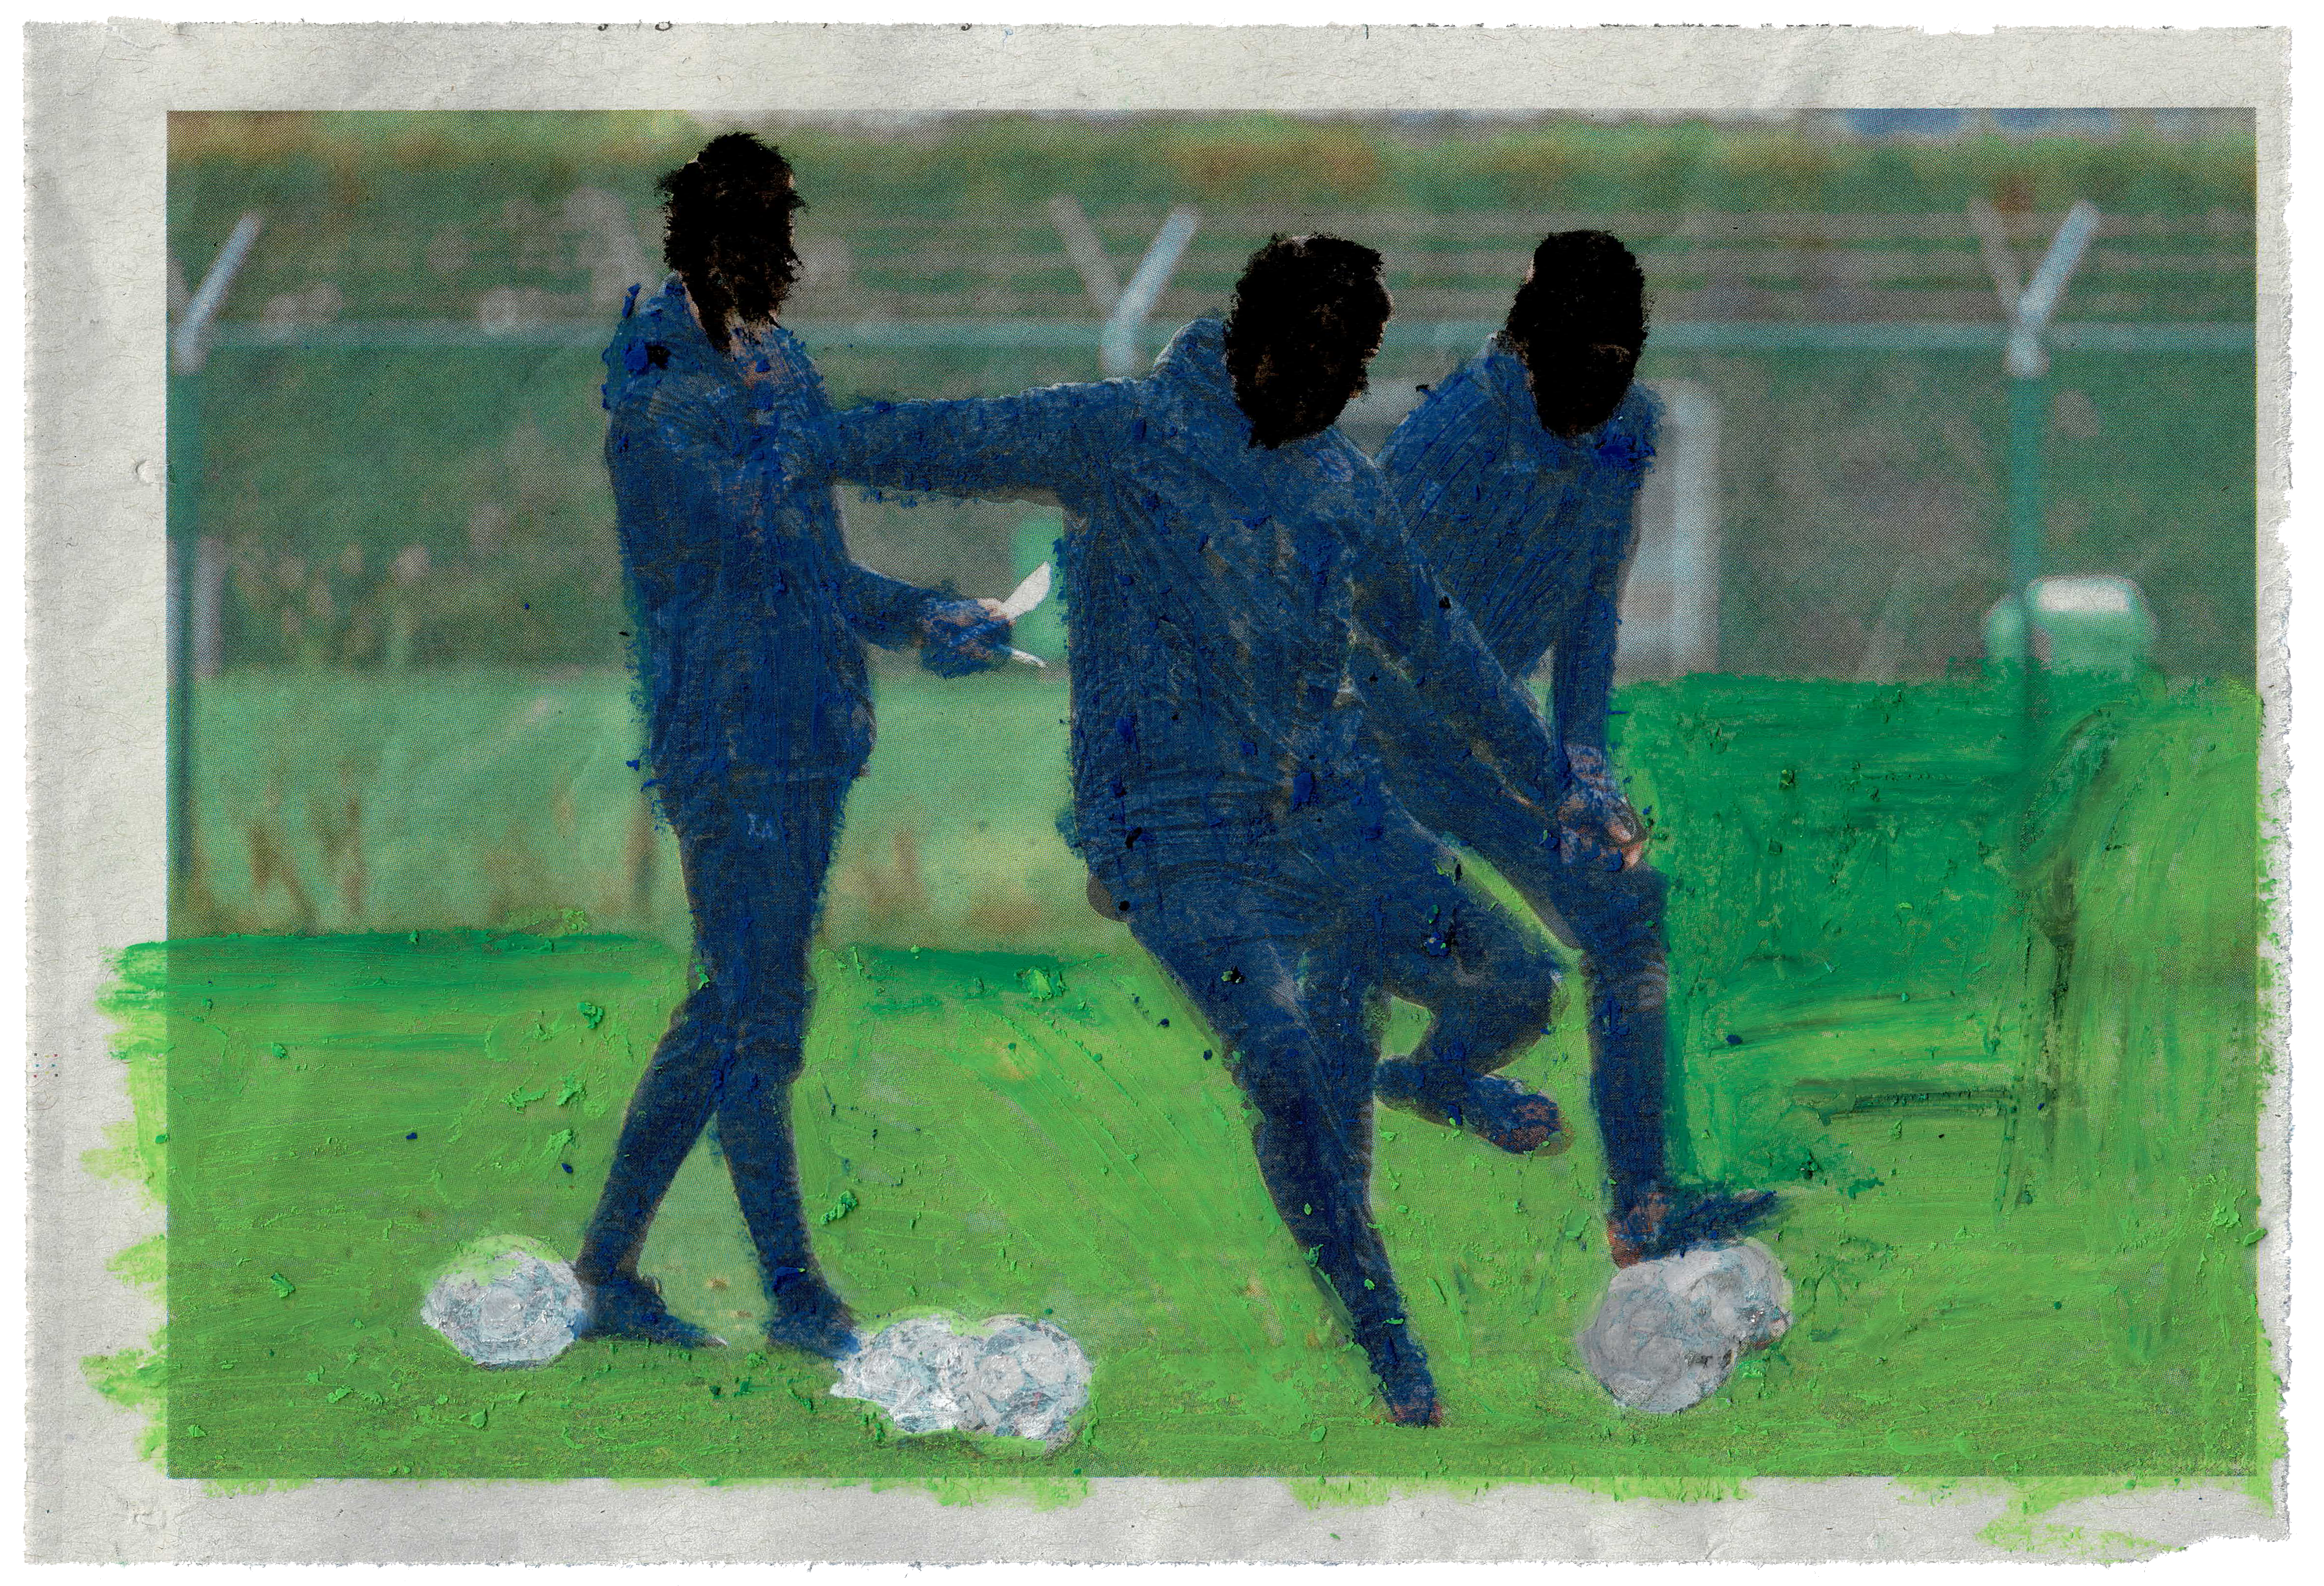 a newspaper photo of three soccer players, with one kicking a ball. the photo is colored over with oil pastels matching the original image